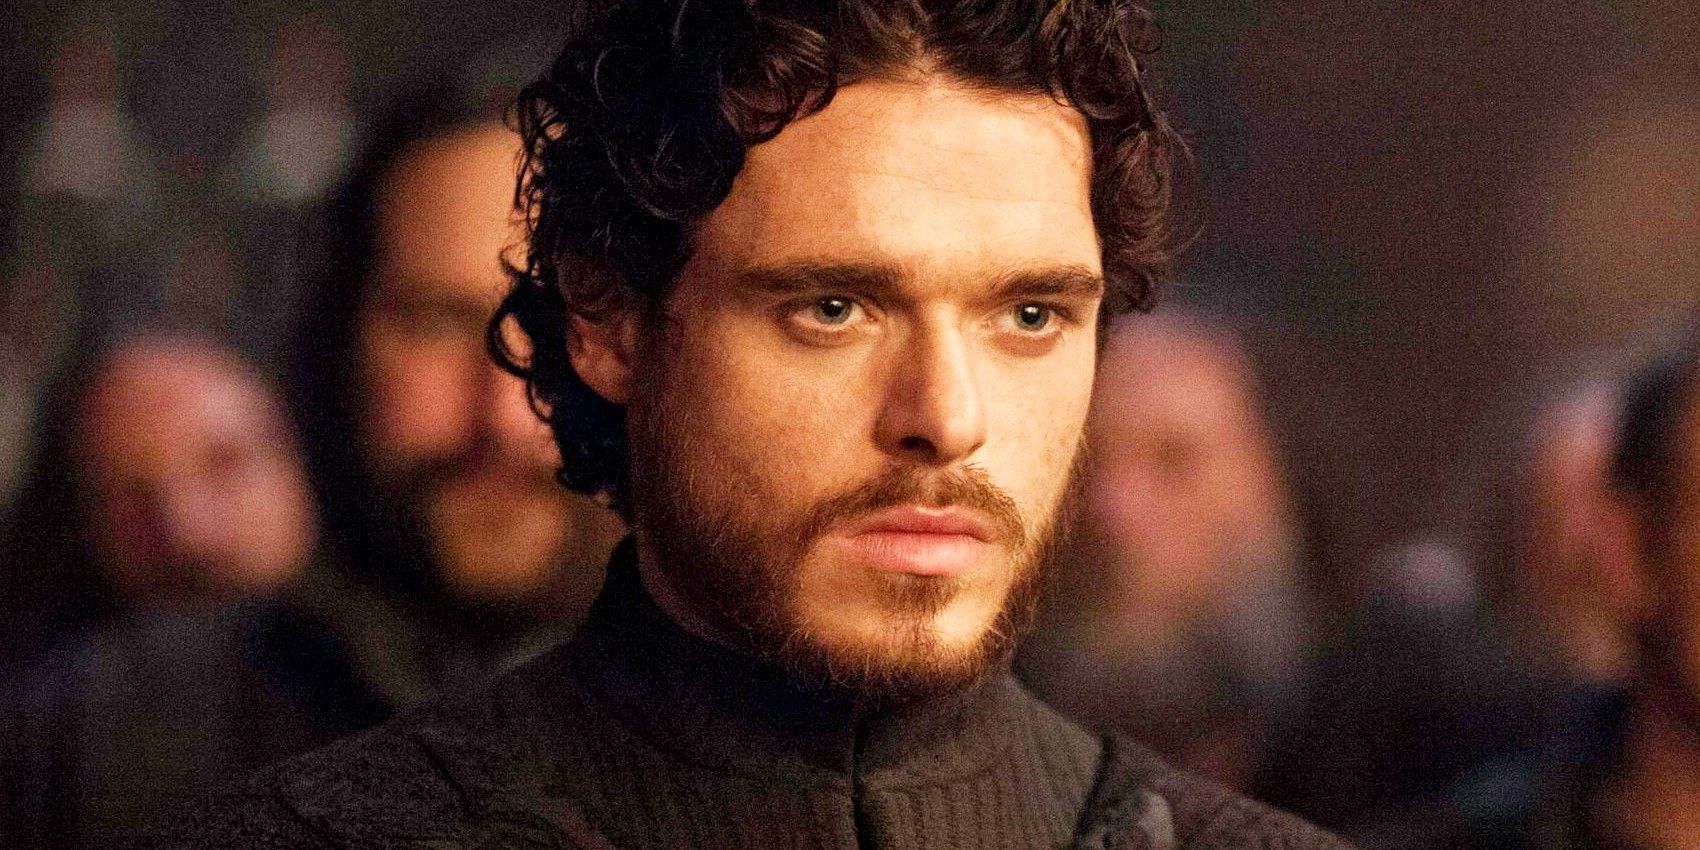 Richard Madden as Robb Stark looking stern at the Red Wedding in Game of Thrones